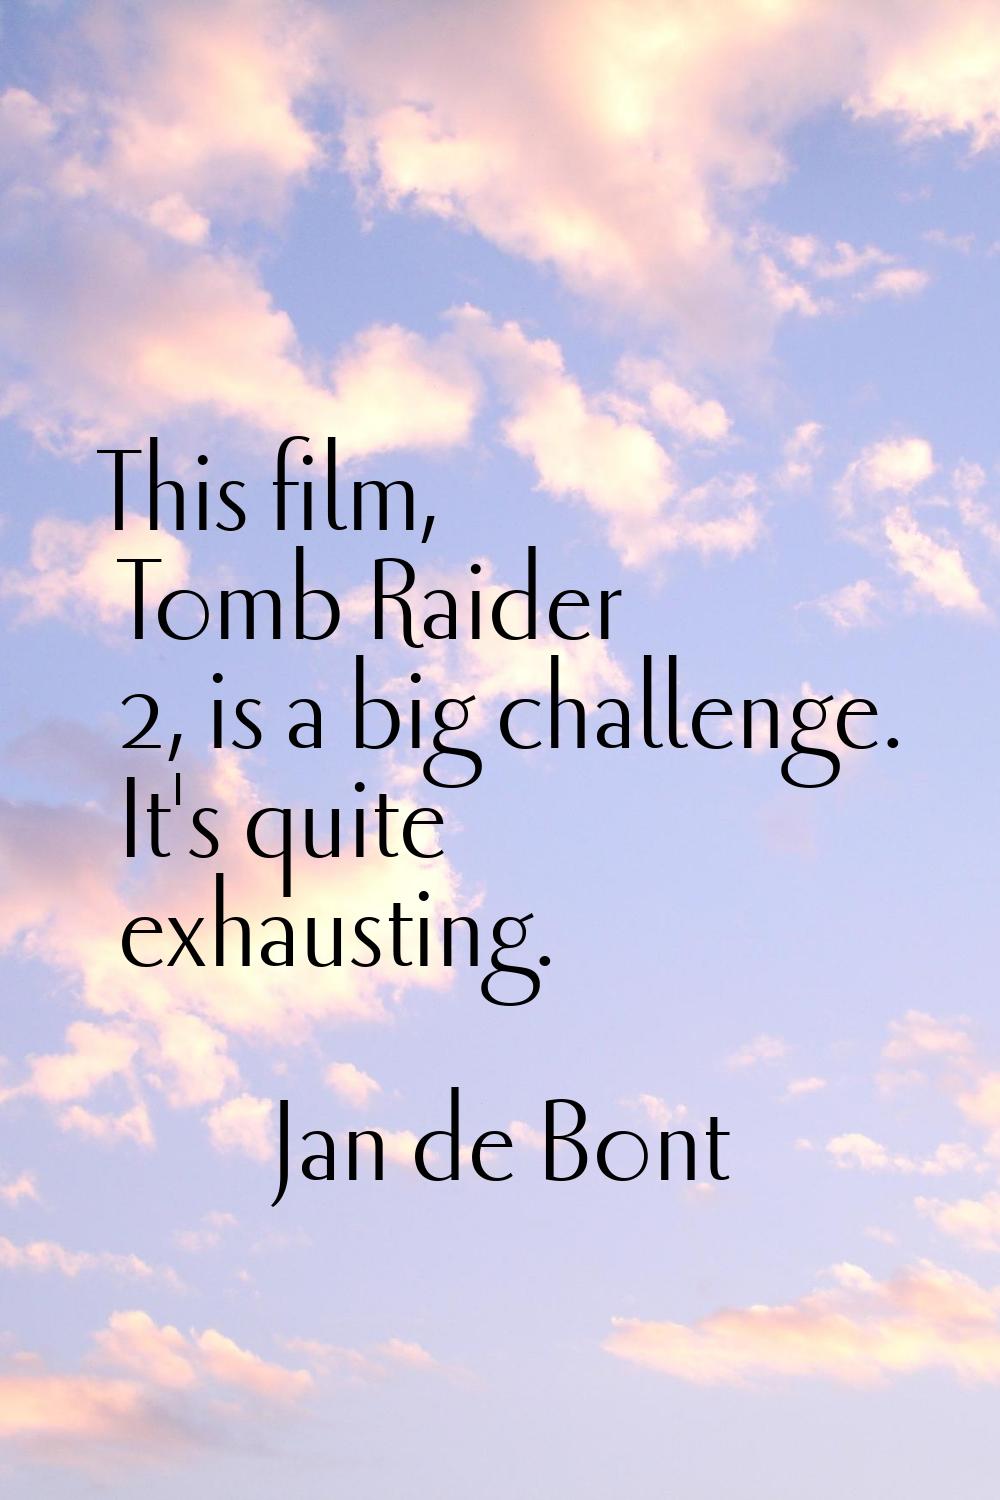 This film, Tomb Raider 2, is a big challenge. It's quite exhausting.